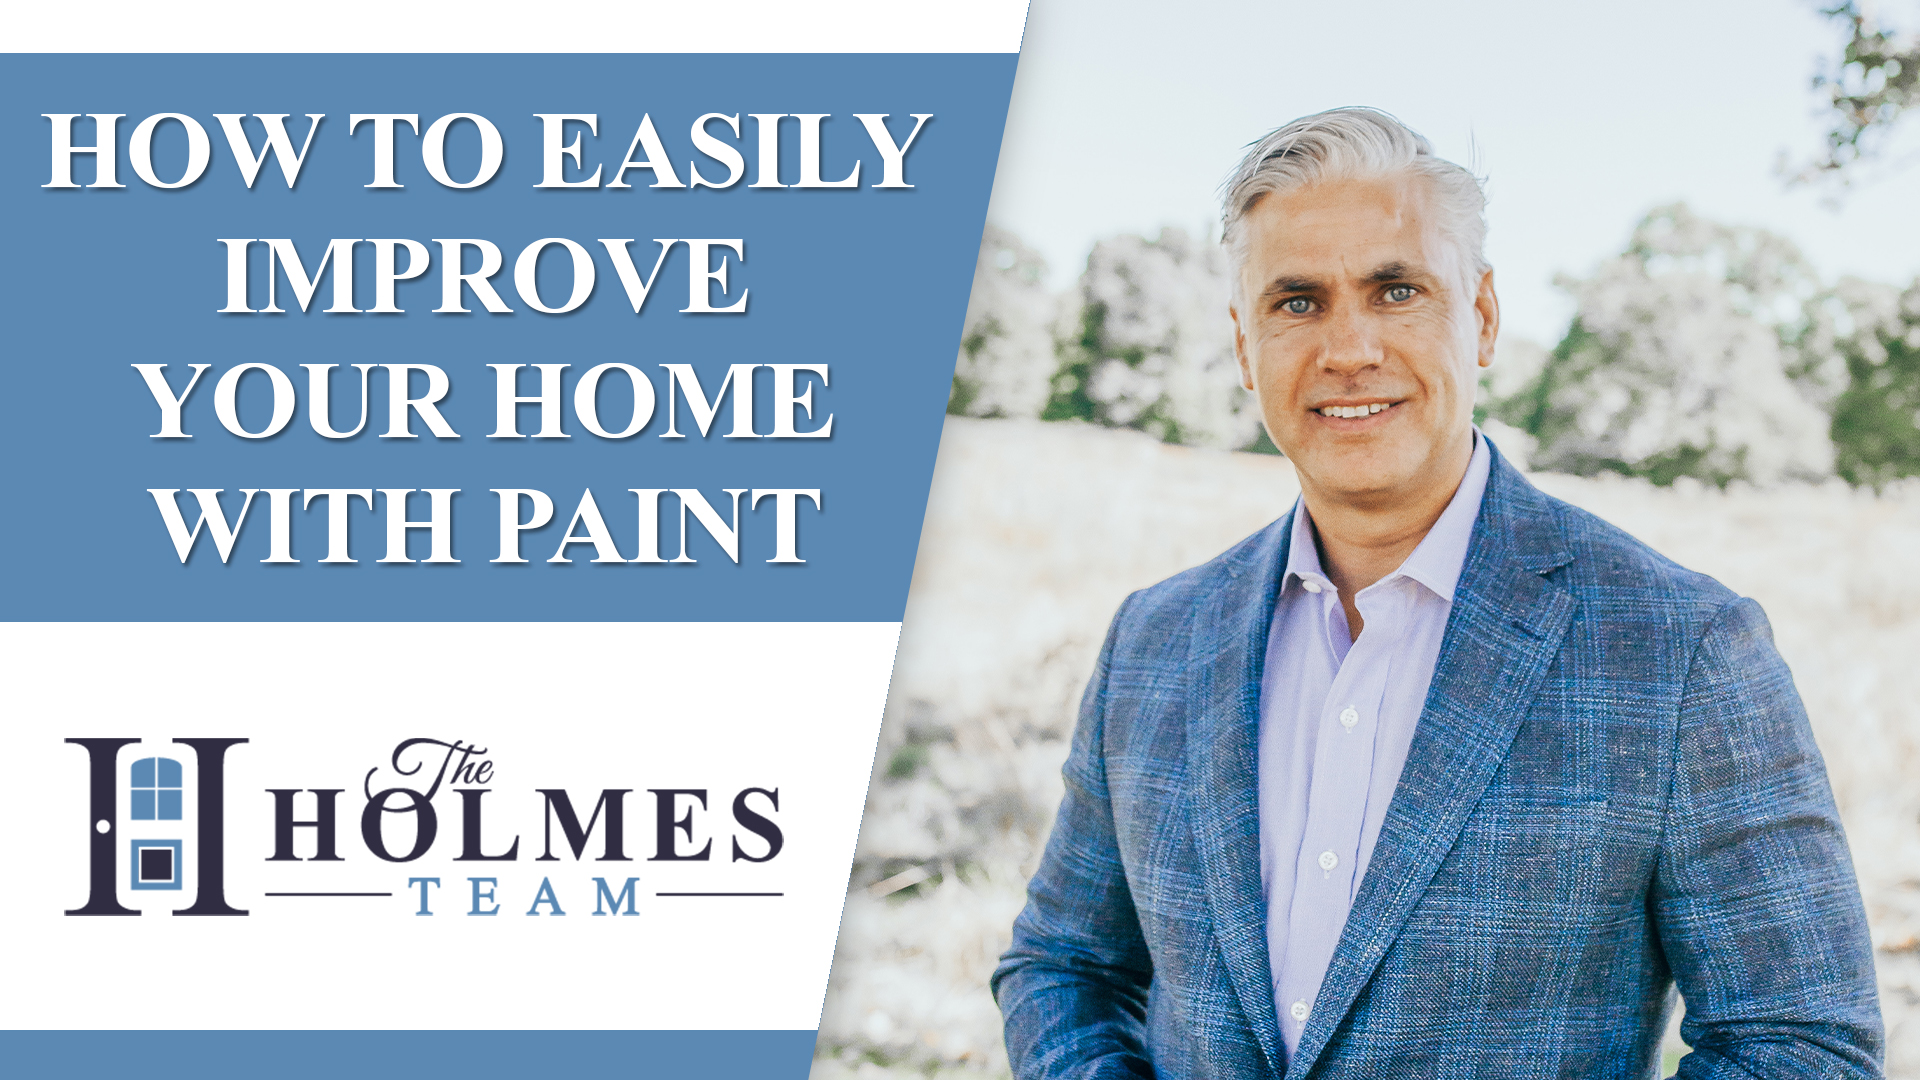 Fresh Paint Is an Easy Way To Improve Your Home